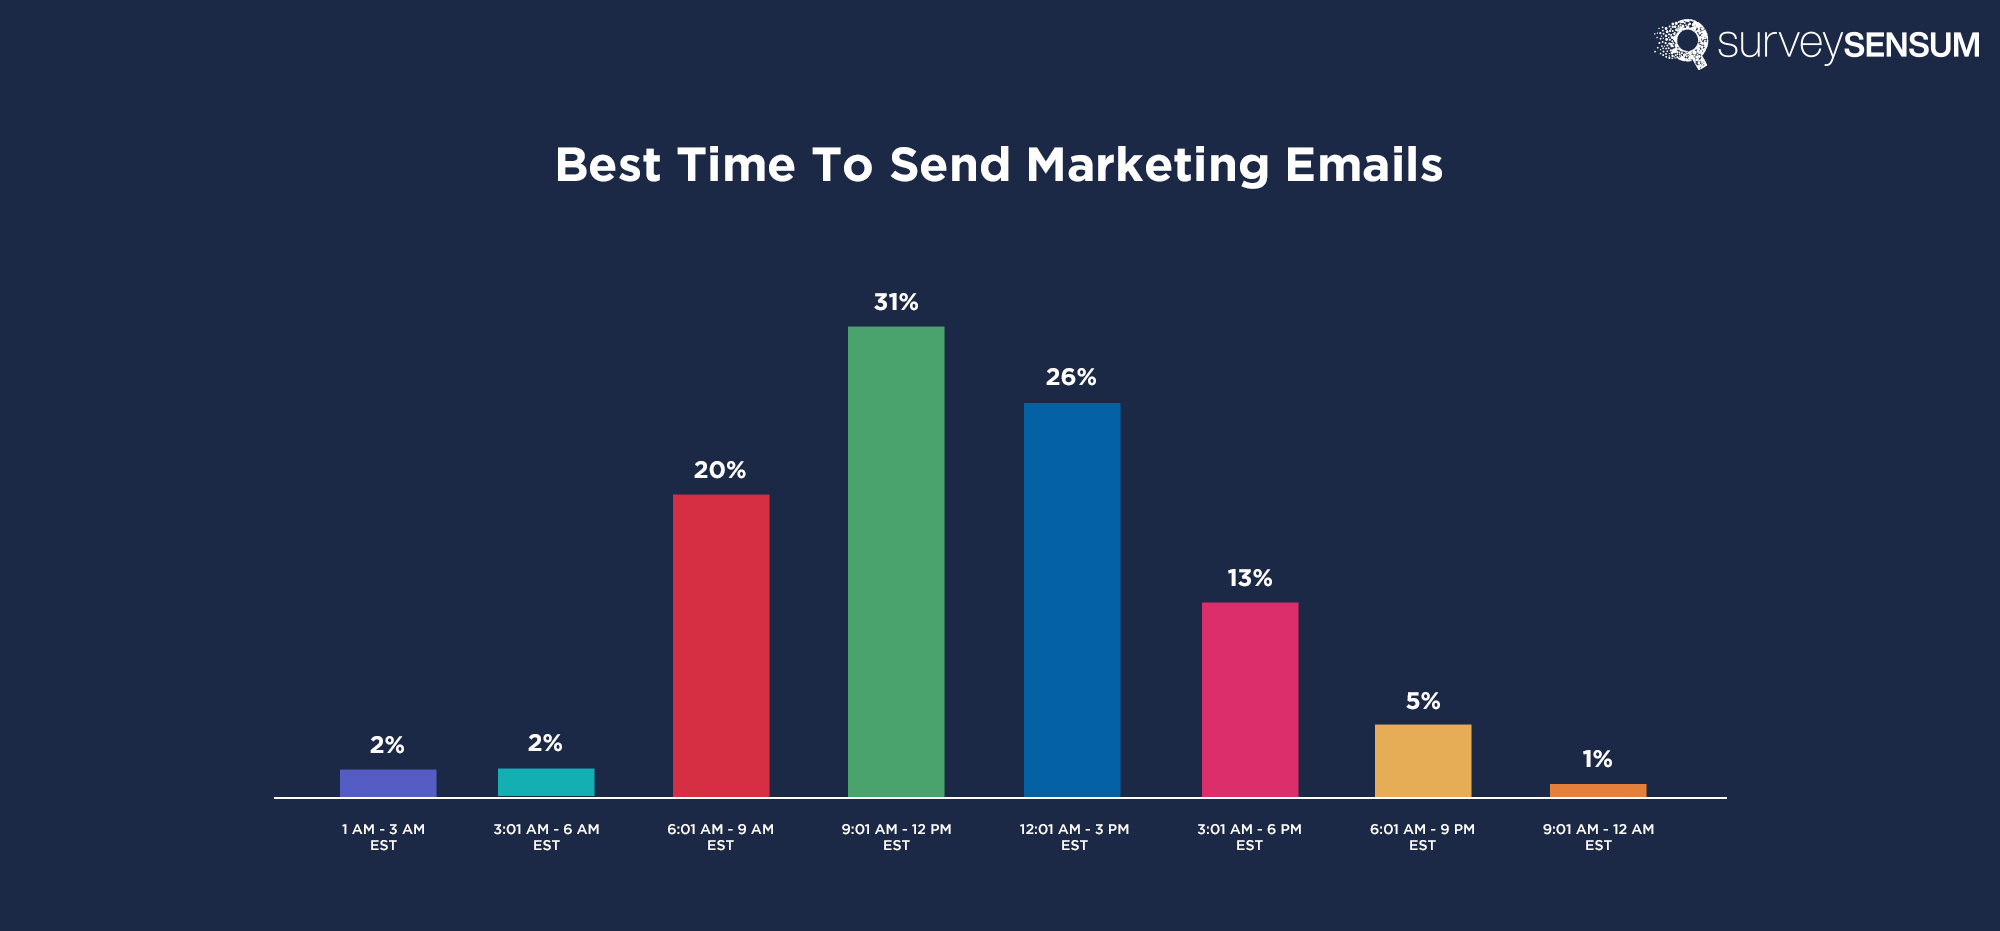 An image that shows a bar-graph of the best time to send marketing emails where time-wise bars can be seen. 